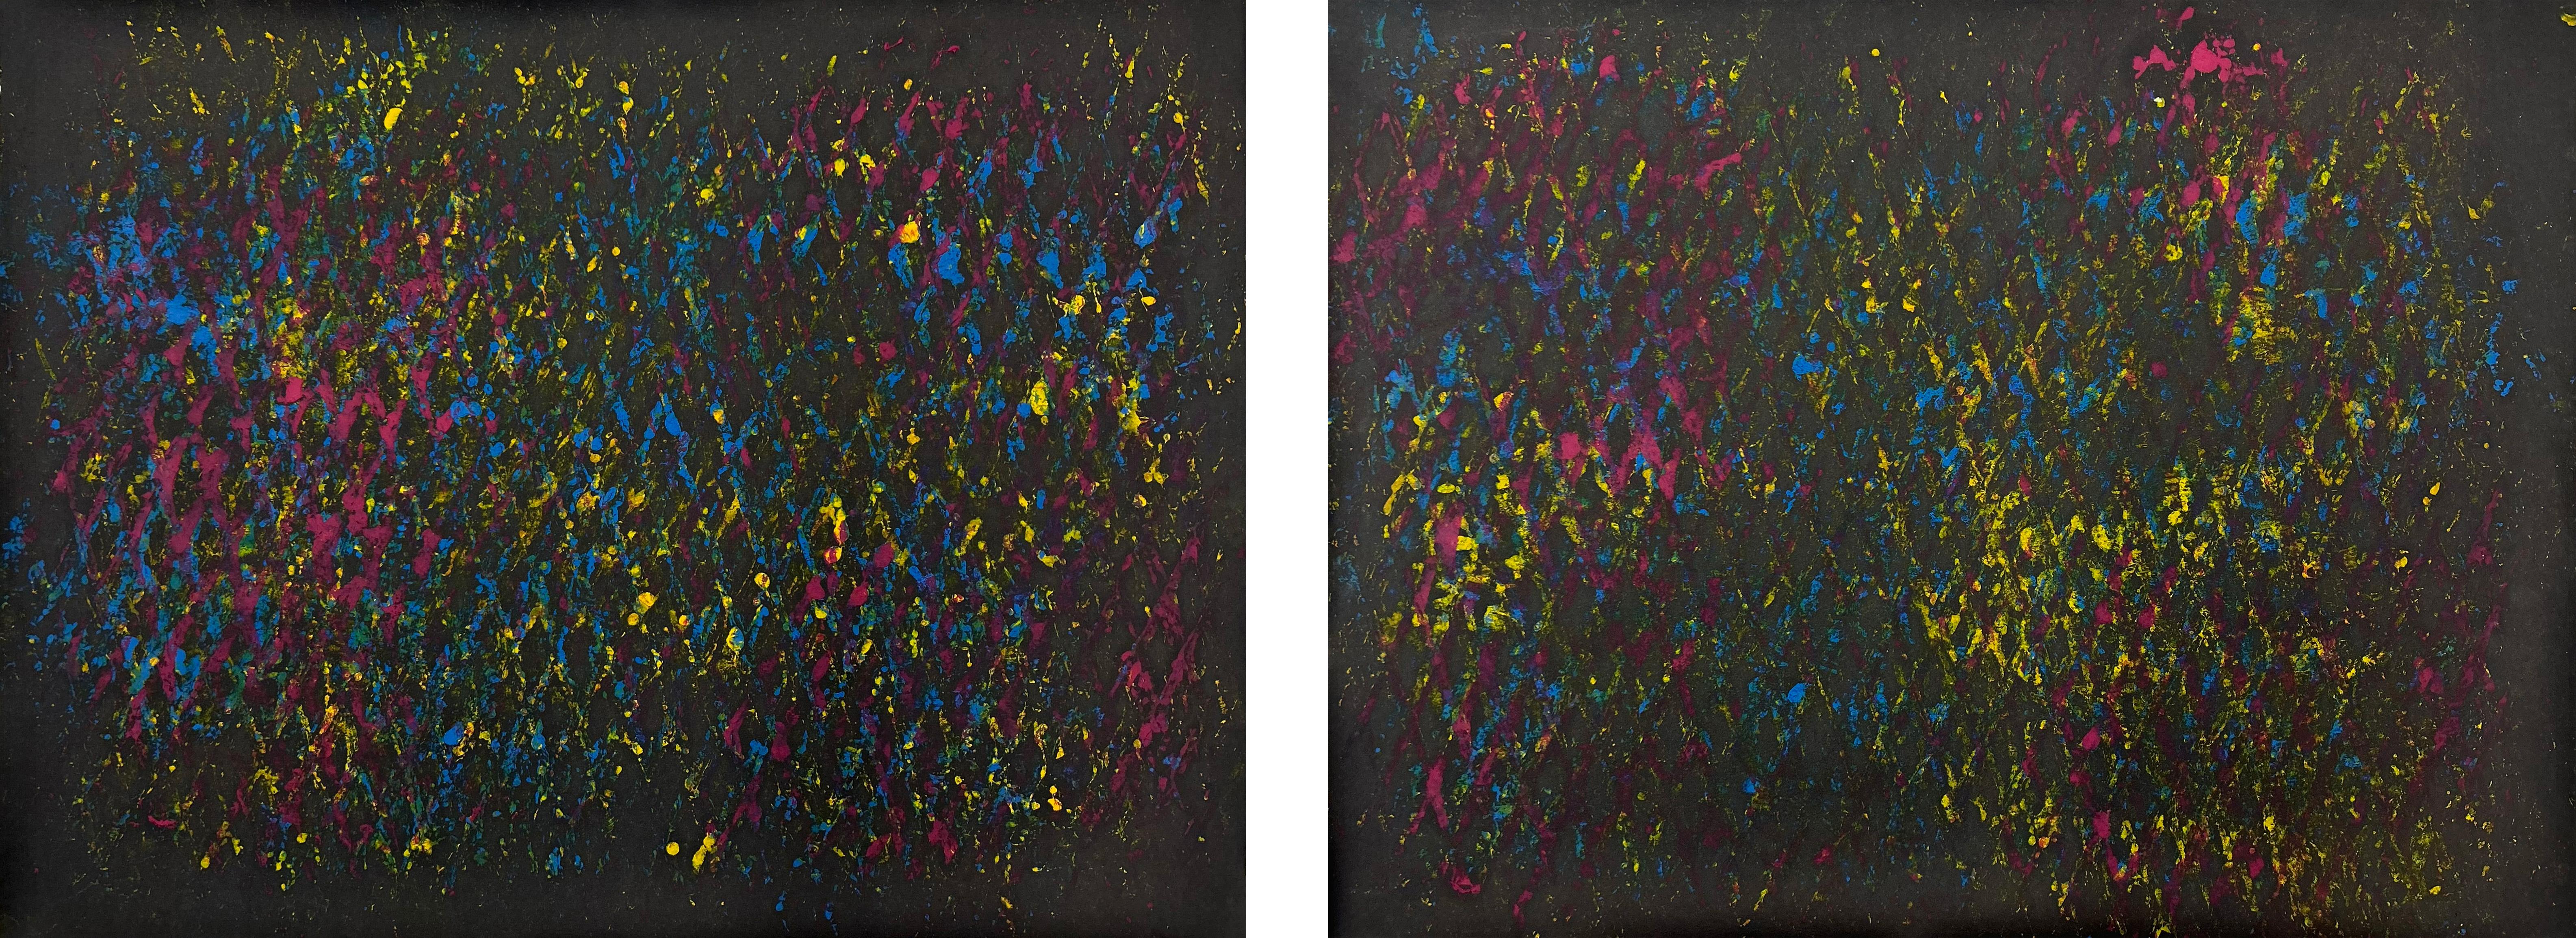 CMYK I and II, Expanded Metal Painting. Diptych